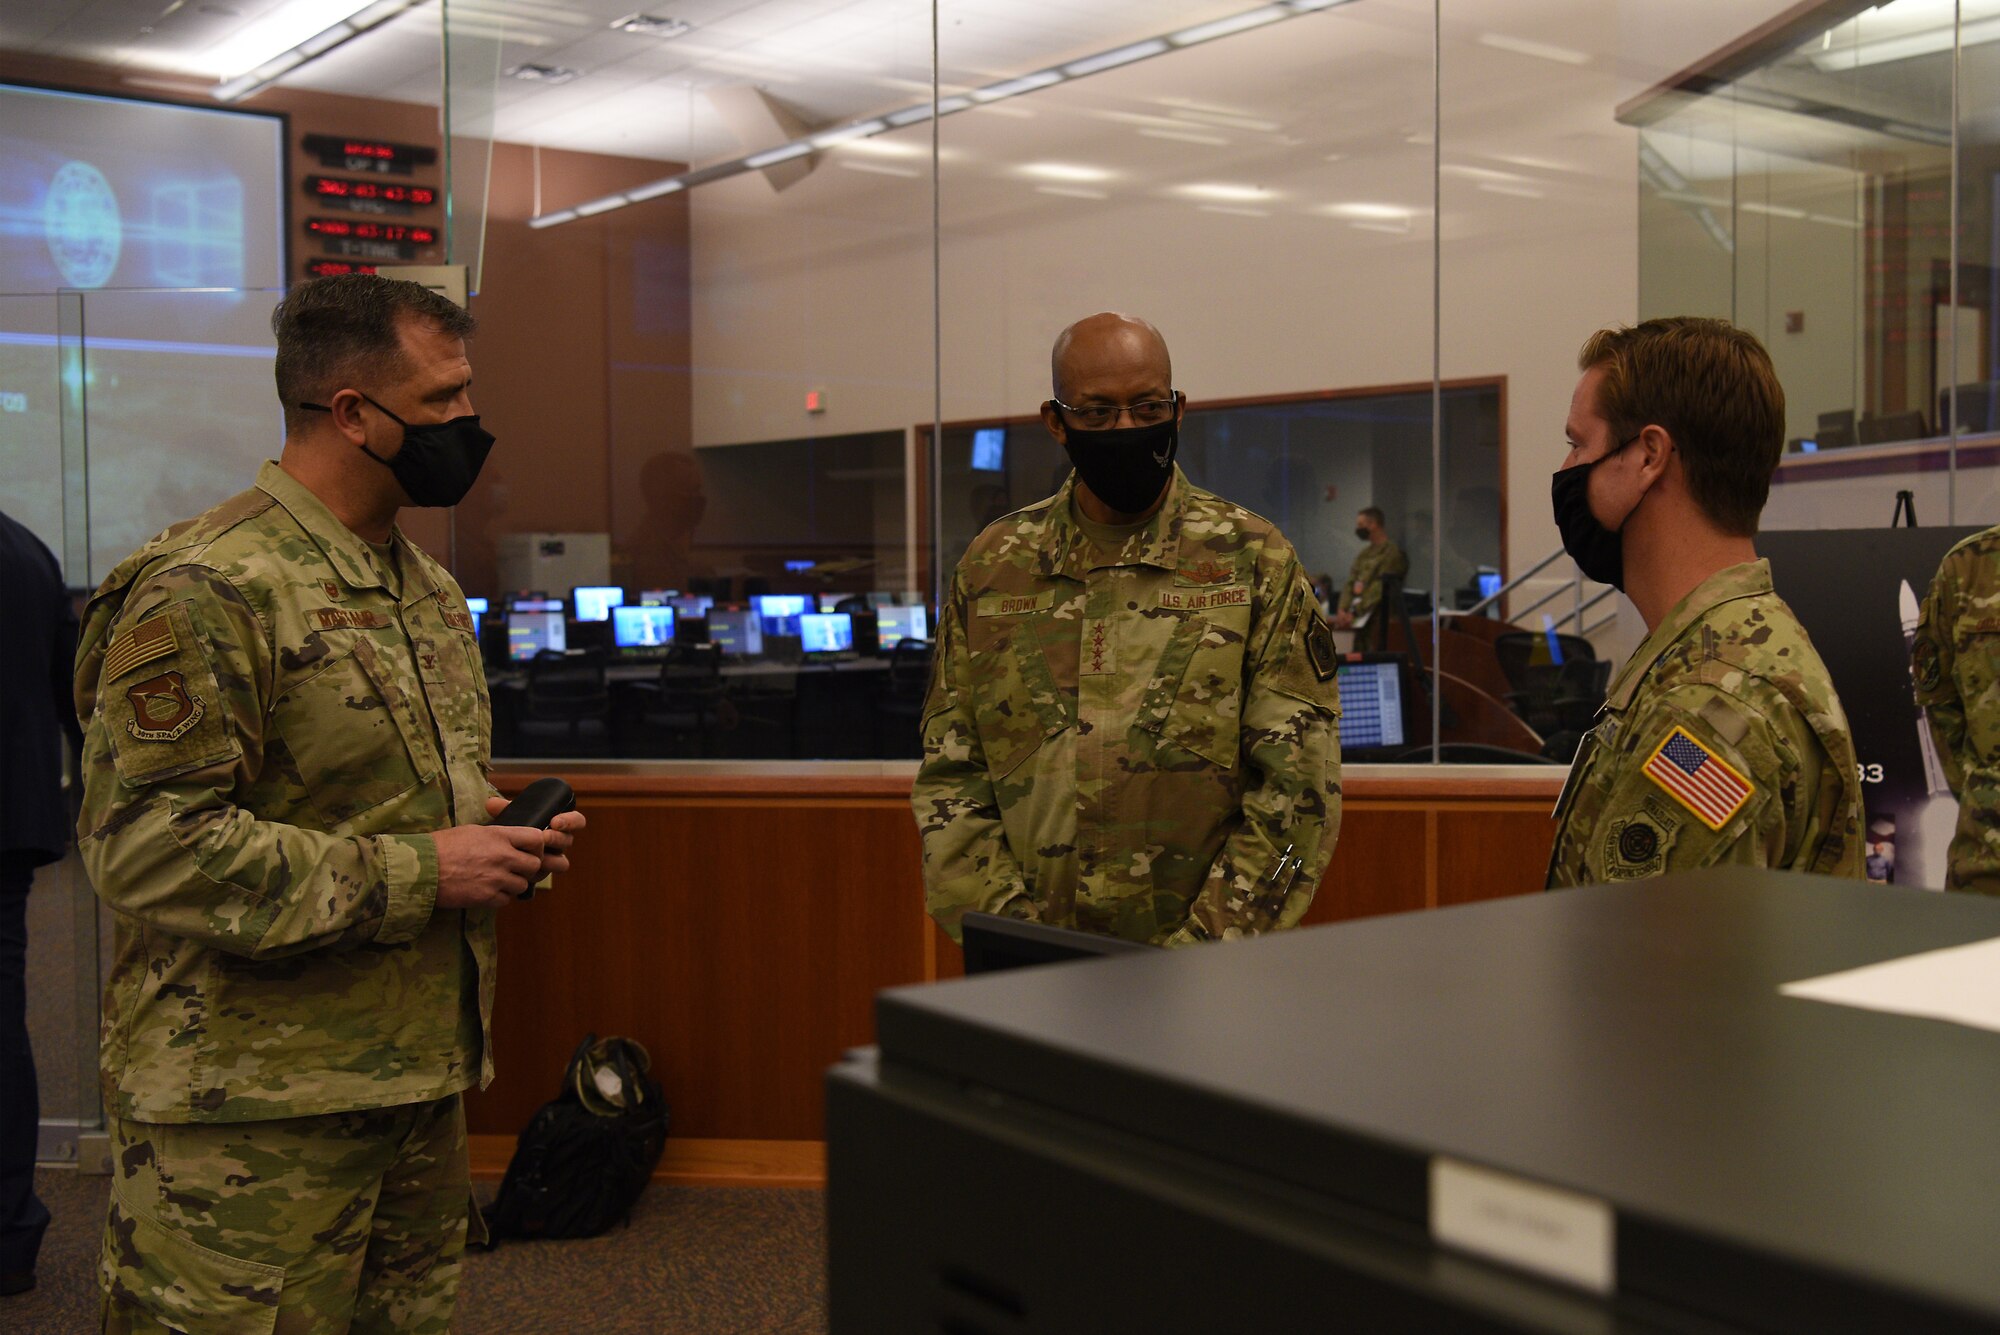 U.S Air Force Chief of Staff Gen. Charles Q. Brown, Jr., speaks with Col. Anthony Mastalir, 30th Space Wing commander, and Lt. Col. Sean Ianacone, 2nd Range Operations Squadron commander, during a tour of the Western Range Operations Control Center Oct. 27, 2020, at Vandenberg Air Force Base, Calif.